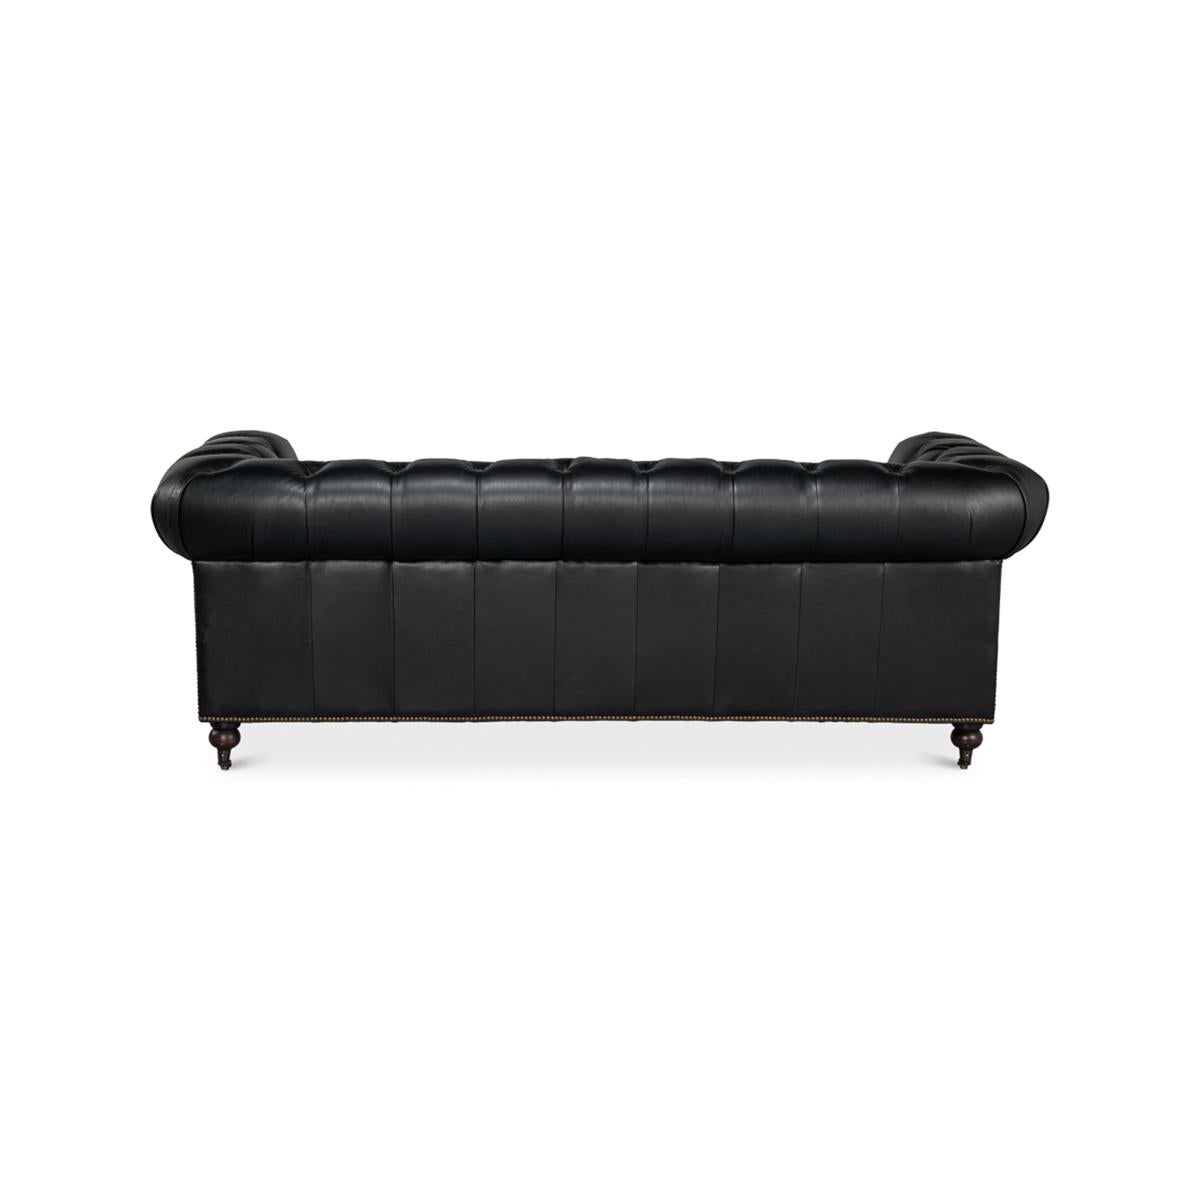 Black Chesterfield Sofa In New Condition For Sale In Westwood, NJ